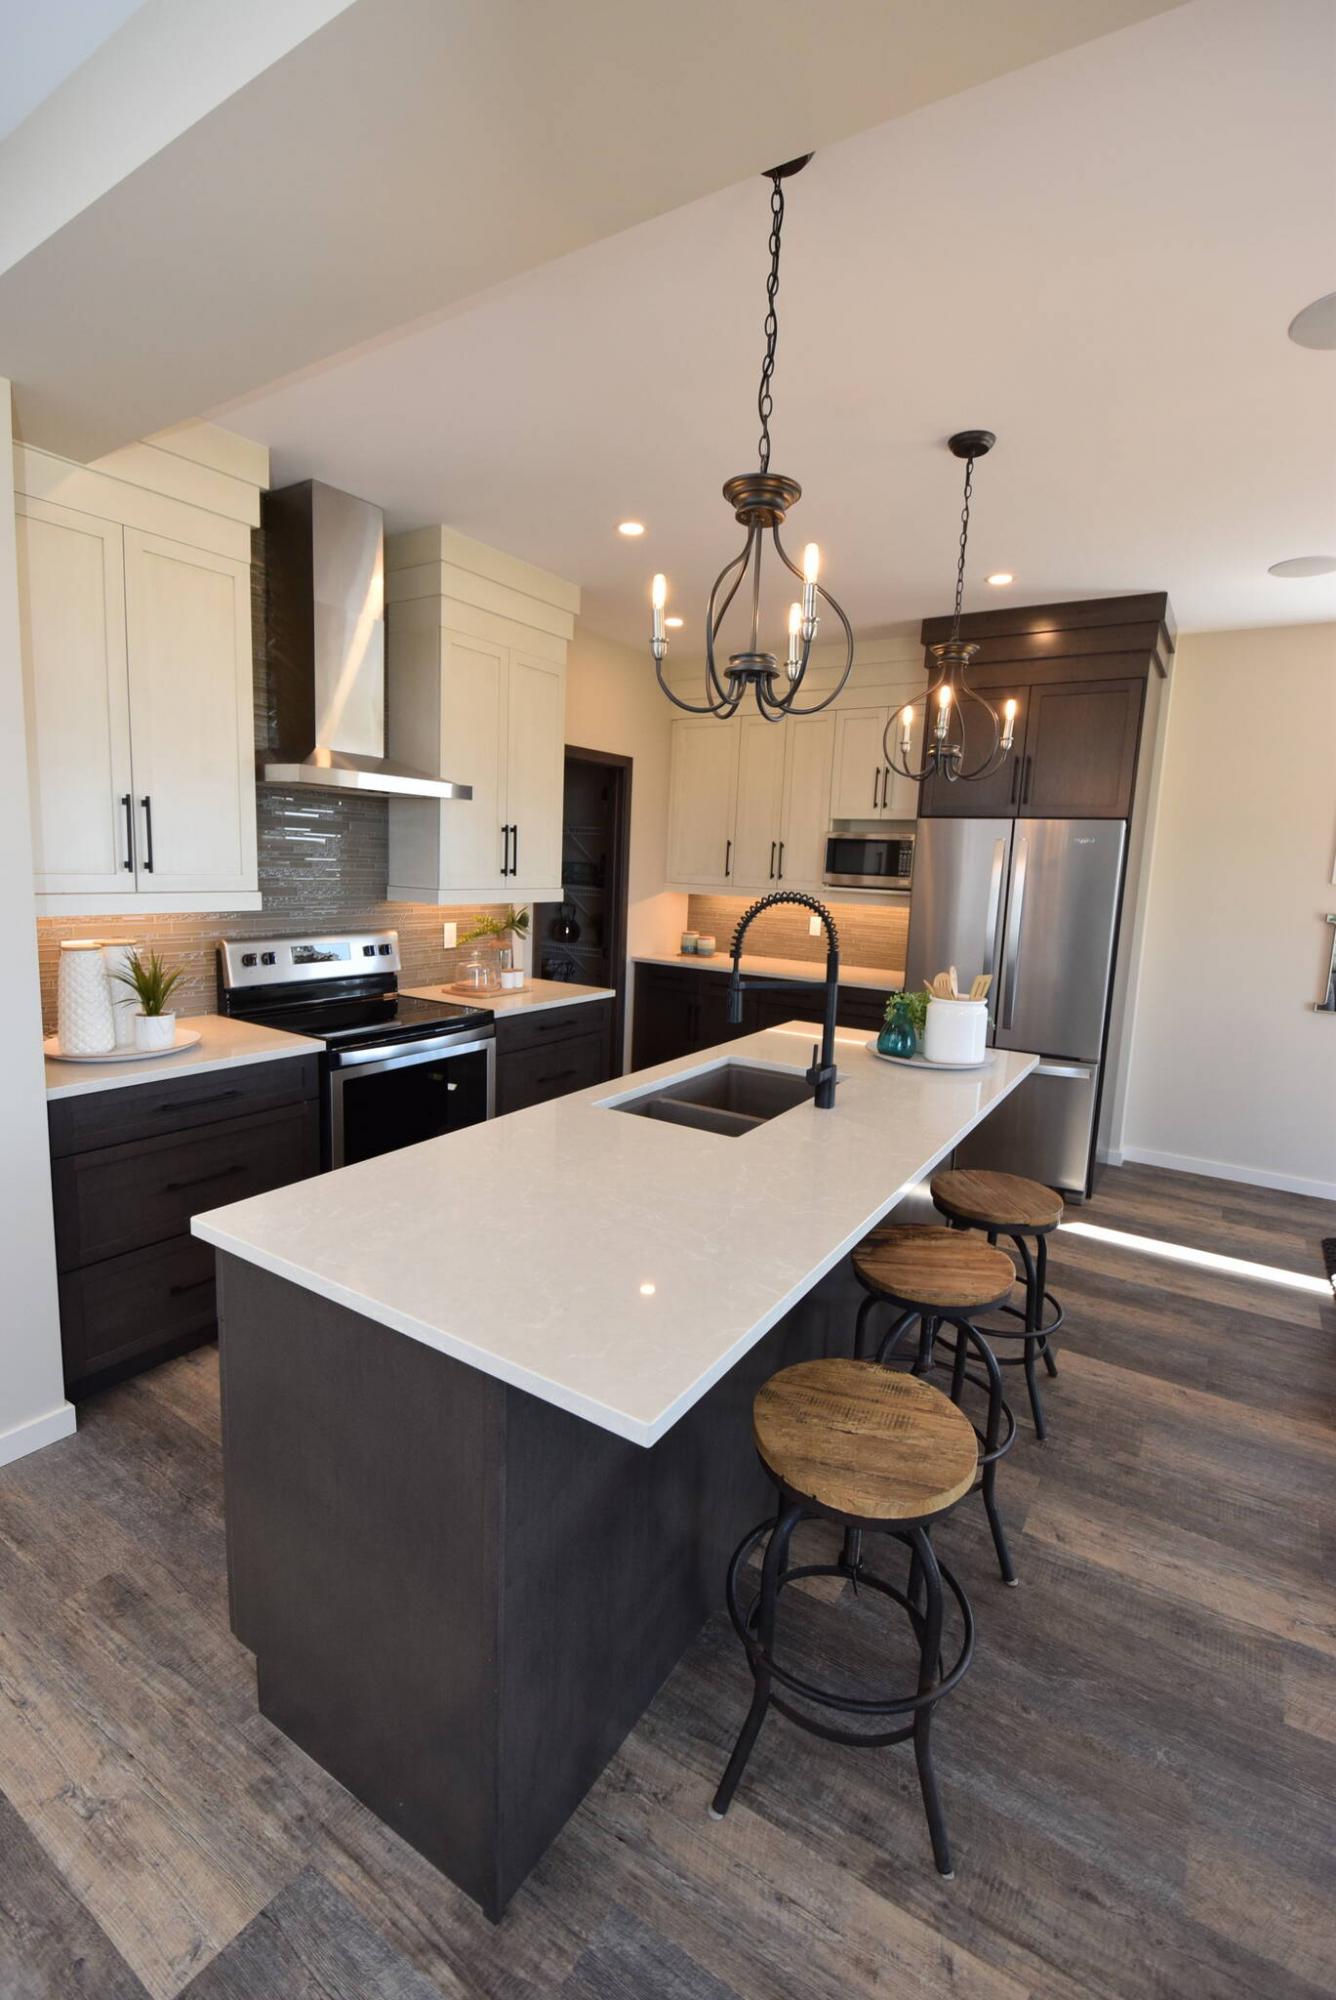 <p>Todd Lewys / Winnipeg Free Press files</p><p>Manitoba&rsquo;s best home builders will be presenting more than 100 unique new show homes at the Spring Parade of Homes, which kicks off on Feb. 26.</p>